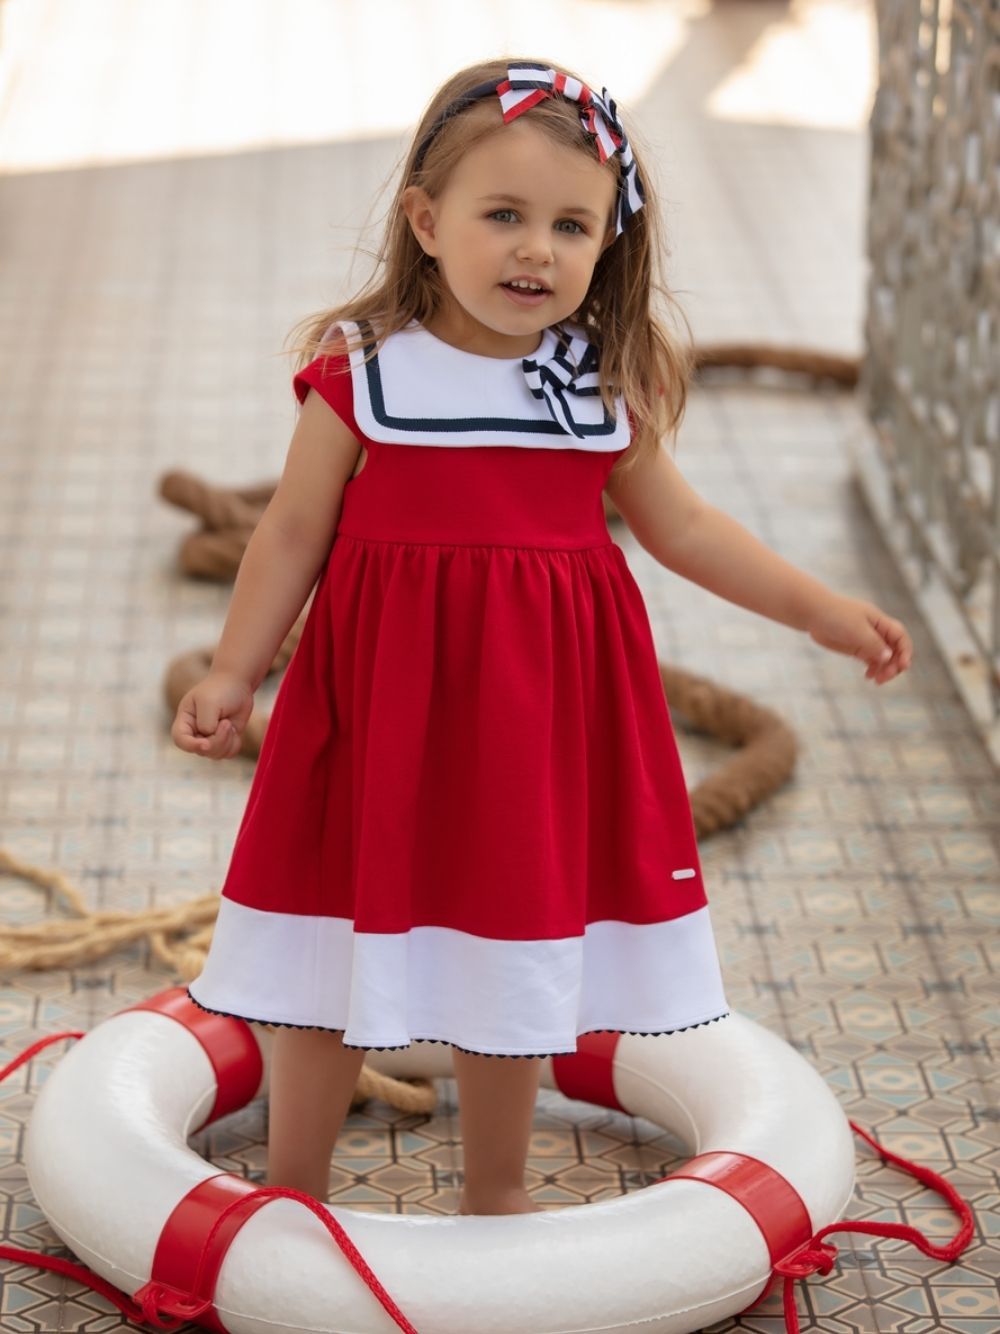 Girls Red Dress with Bow